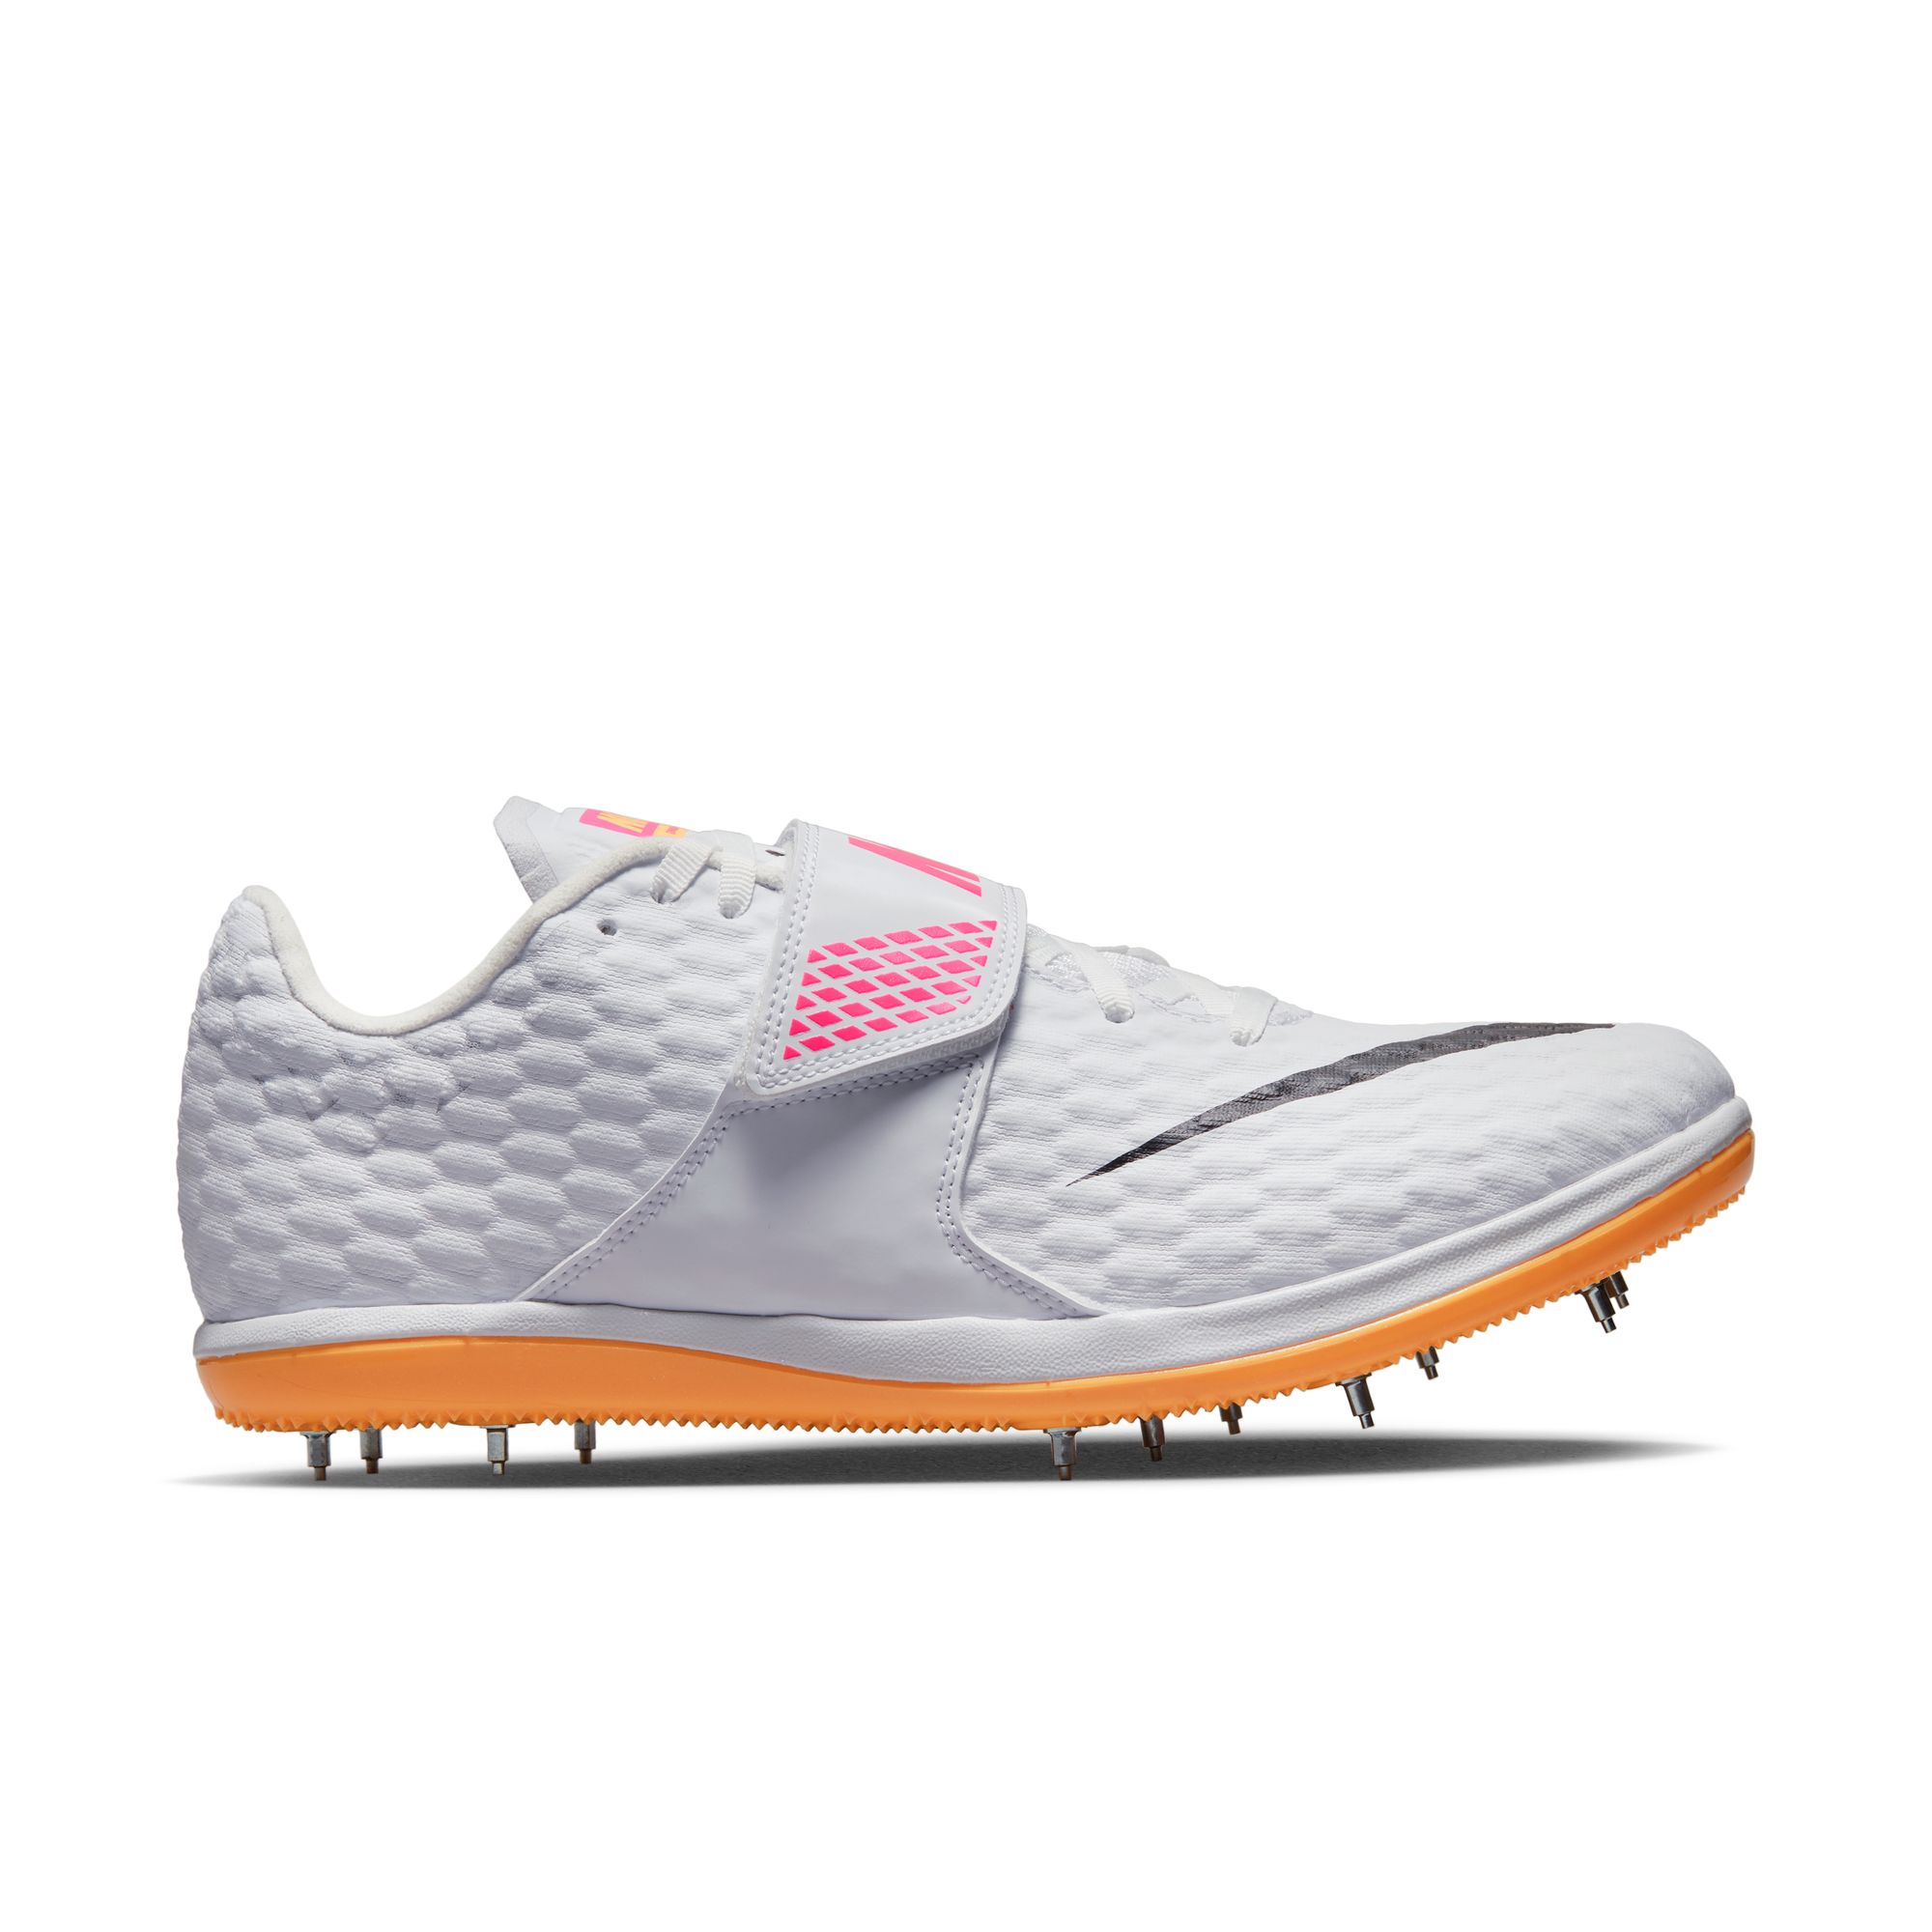 Unisex Nike High Jump Elite - The Running Company - Running Shoe Specialists